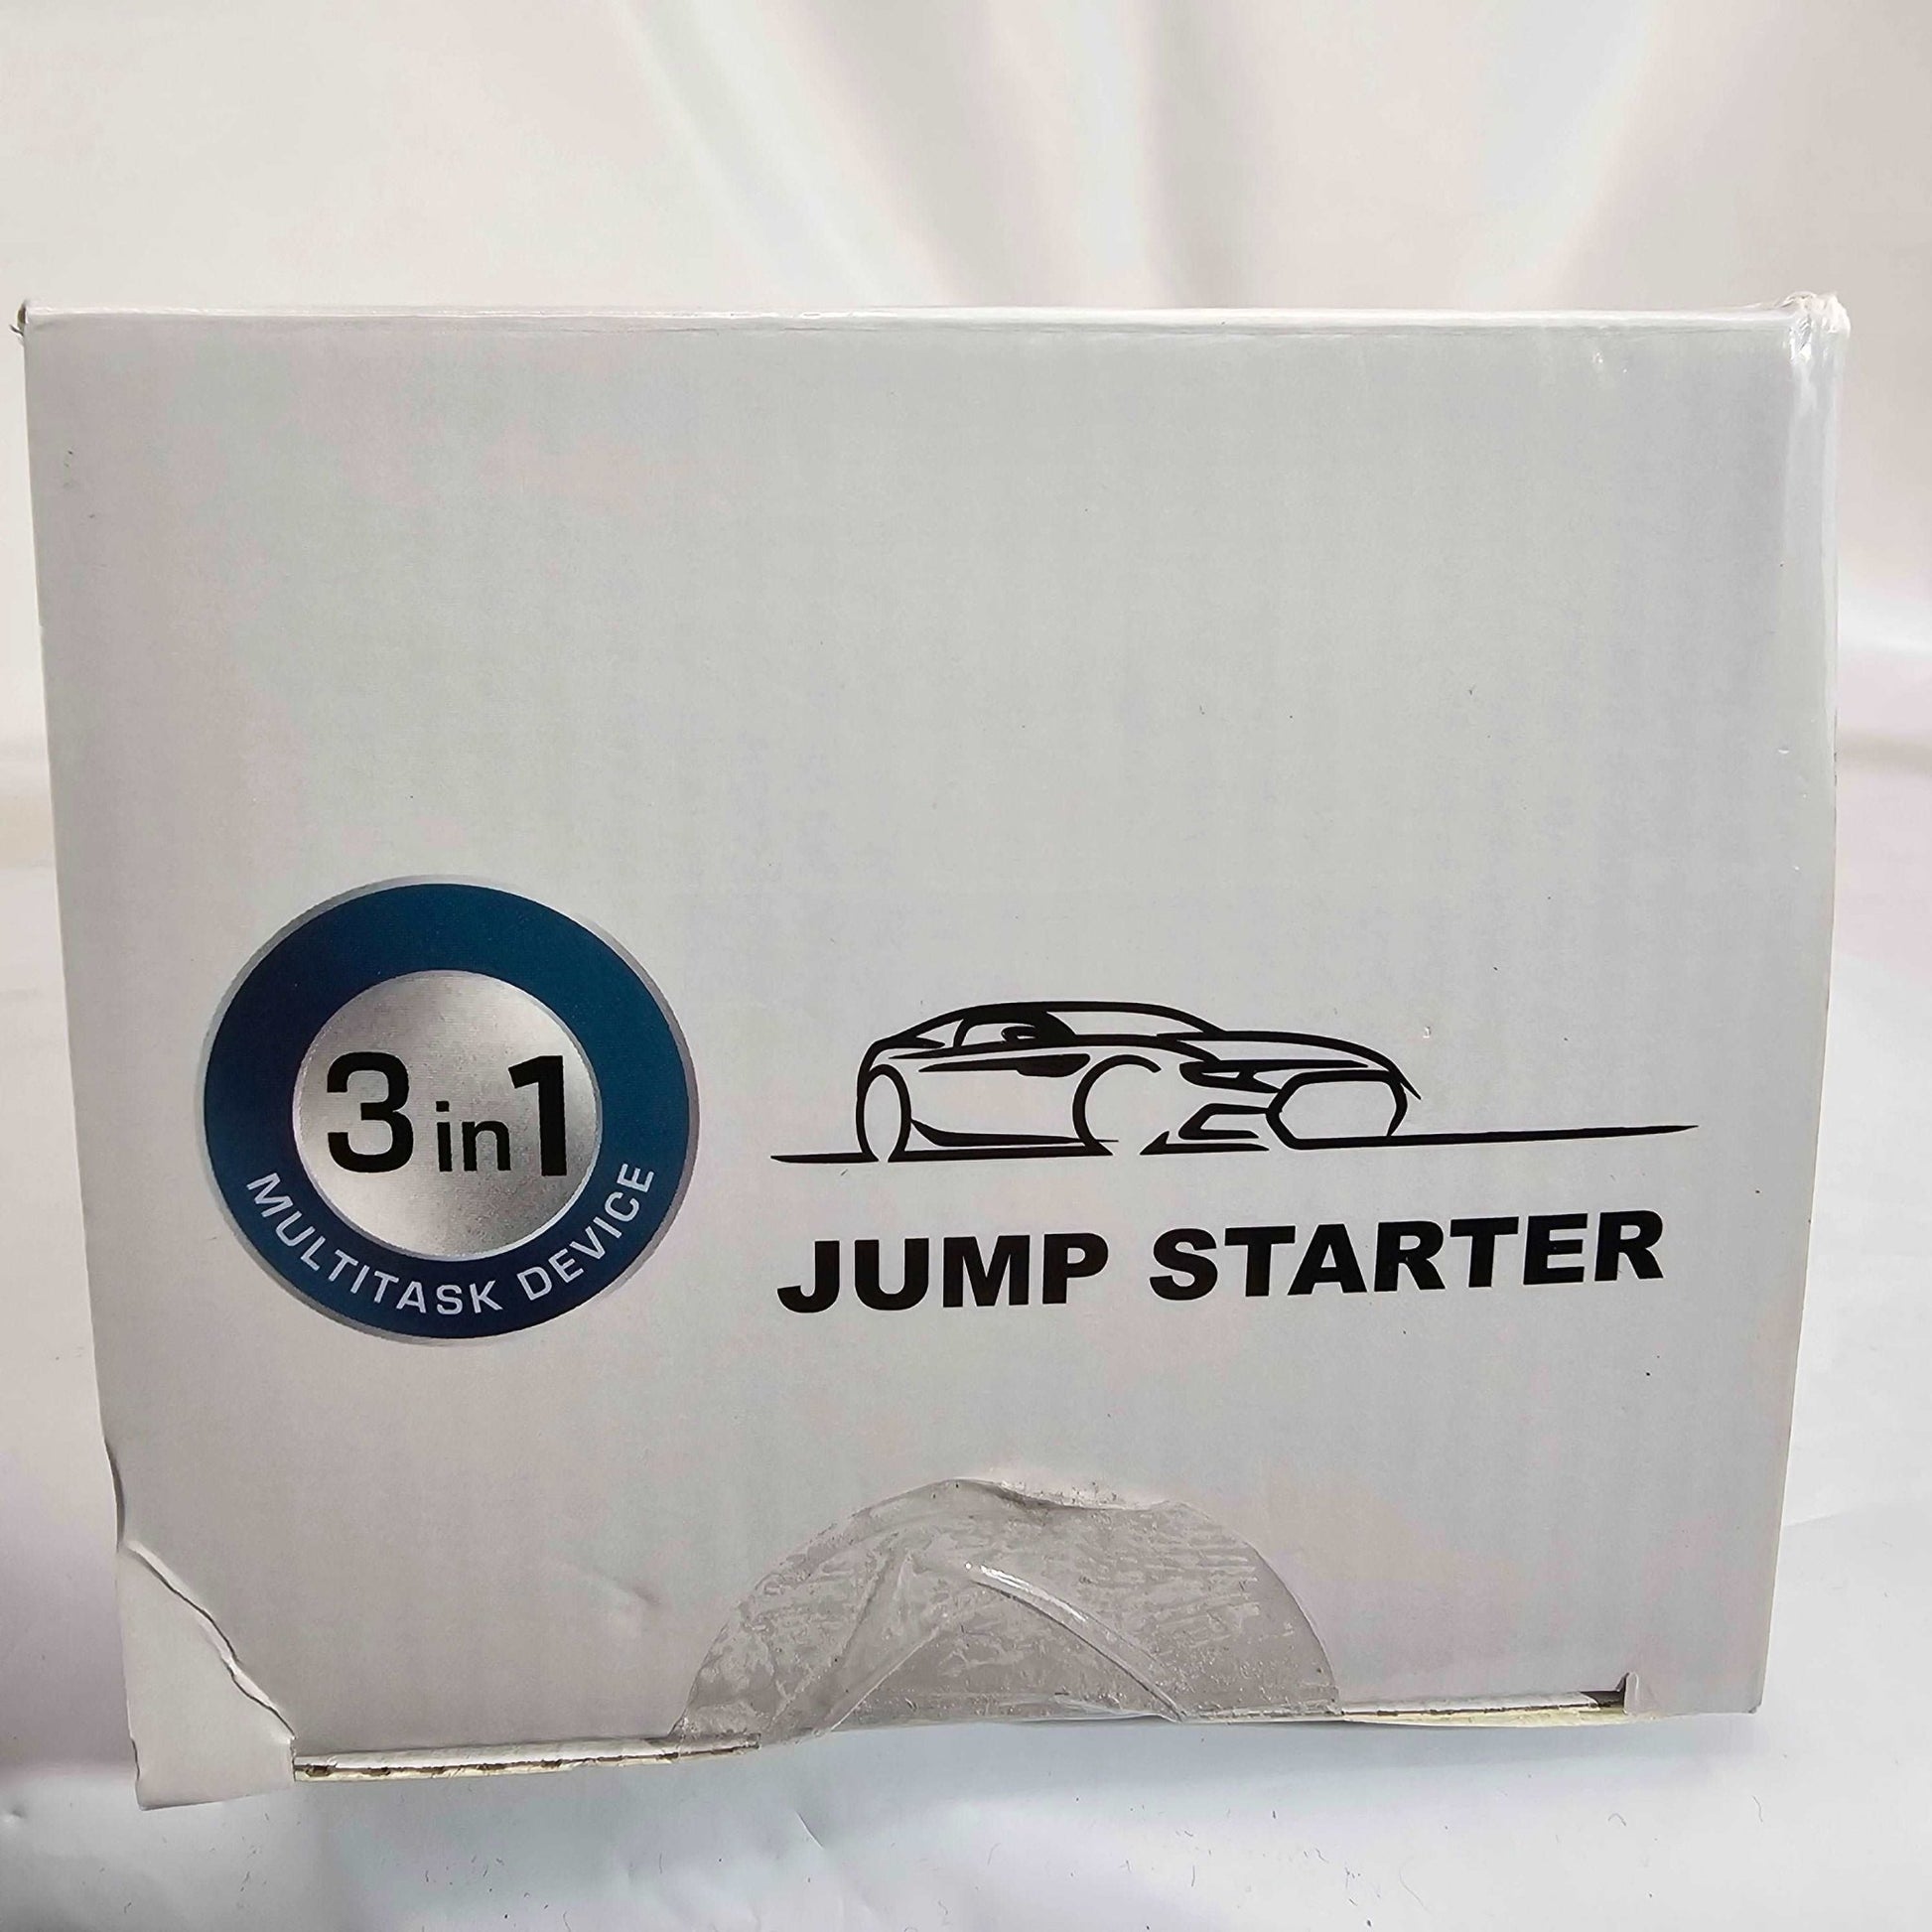 3-in-1 Jump Starter Car Emergency Power Supply - DQ Distribution